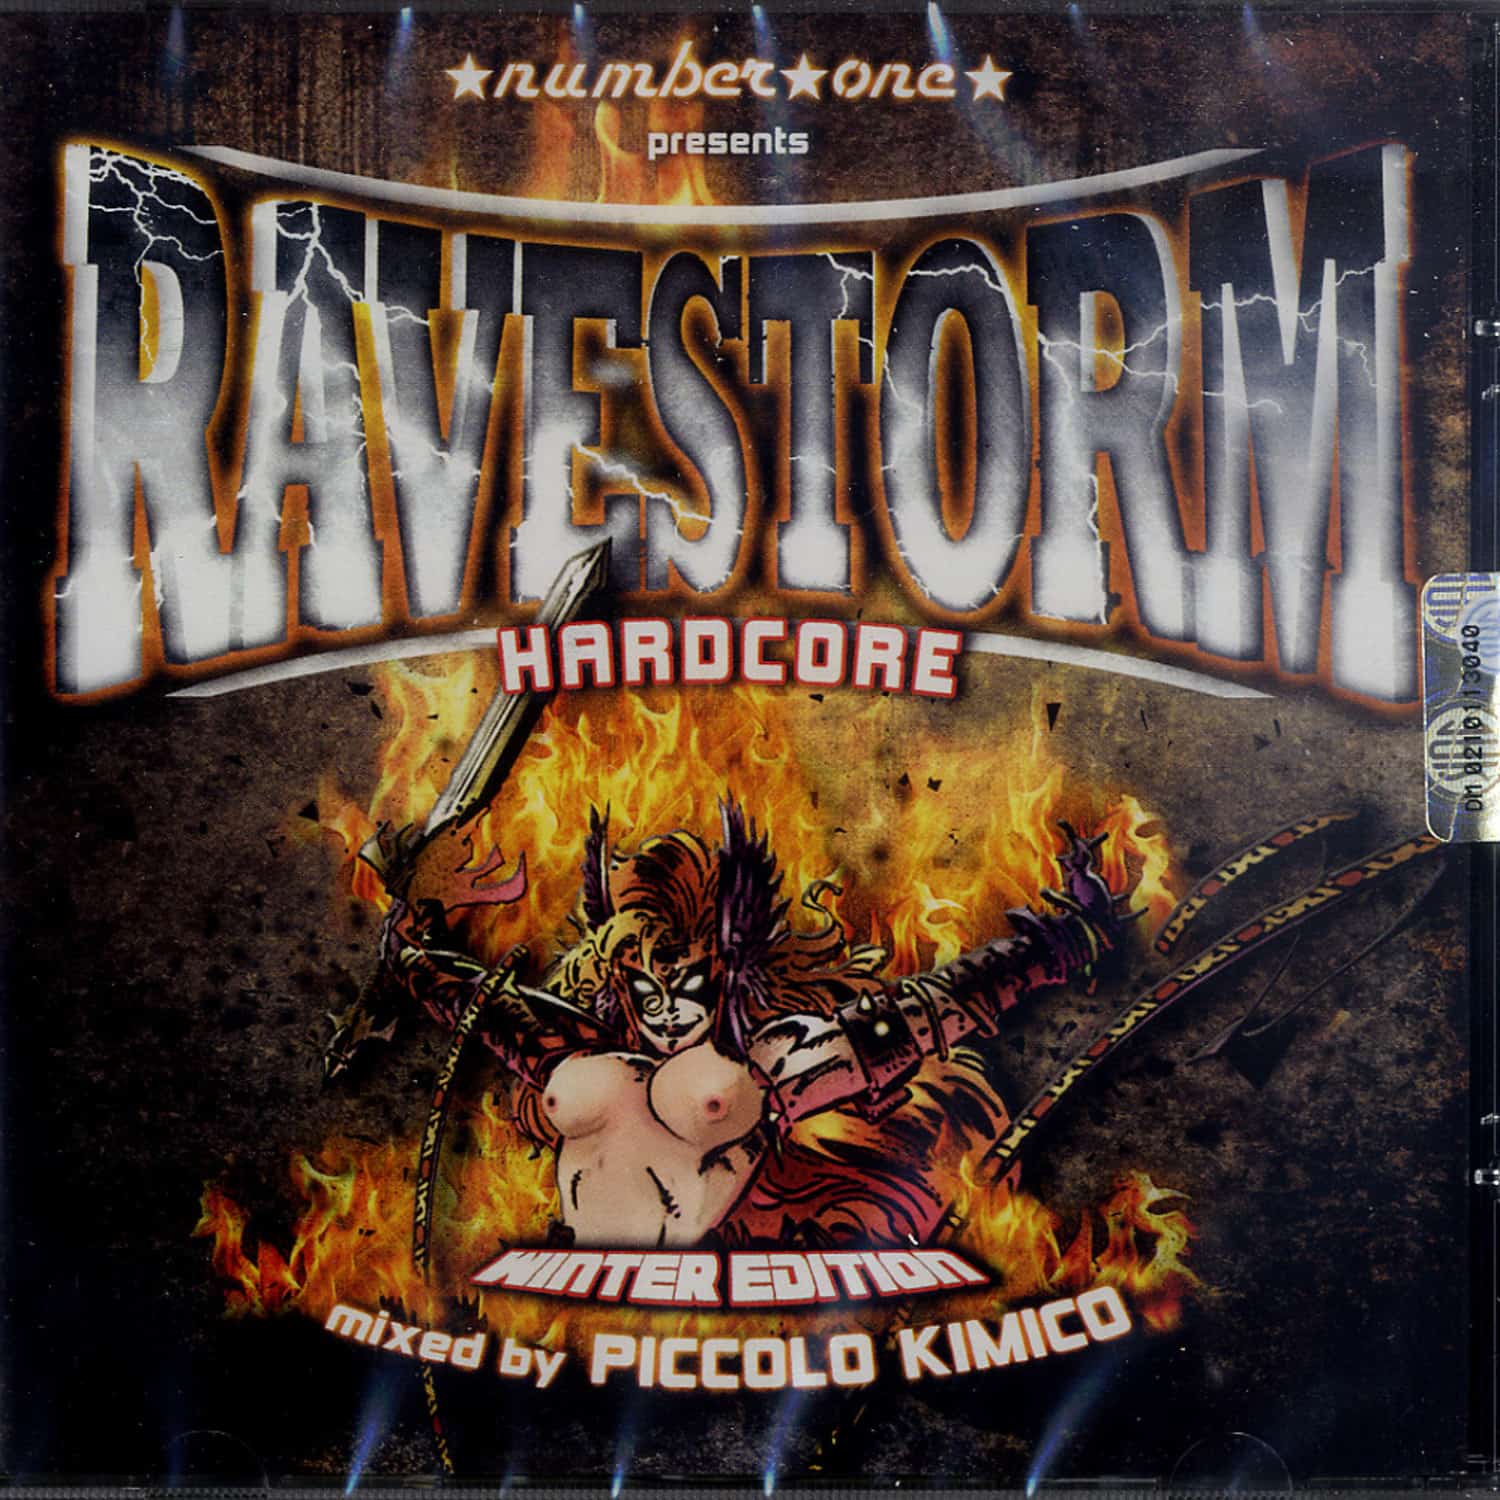 Various Artist mixed by Piccolo Kimico - RAVESTORM HARDCORE WINTER EDITION 2010 